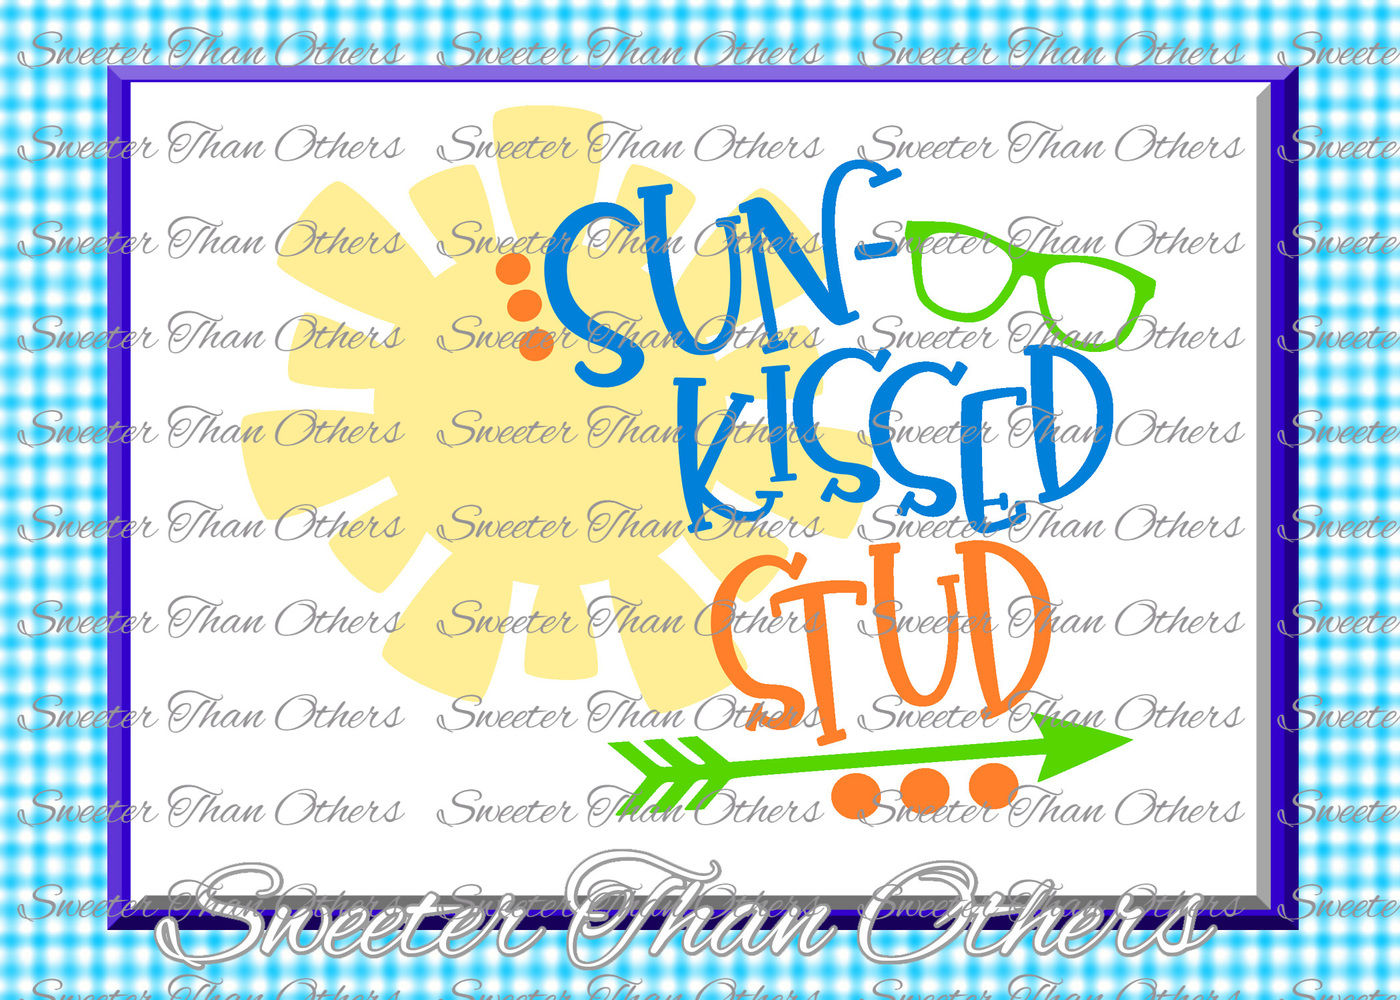 Download Beach Svg Sun Kissed Stud Svg Summer Beach Pattern Dxf Silhouette Cameo Cut File Cricut Cut File Instant Download Vinyl Design By Sweeter Than Others Thehungryjpeg Com